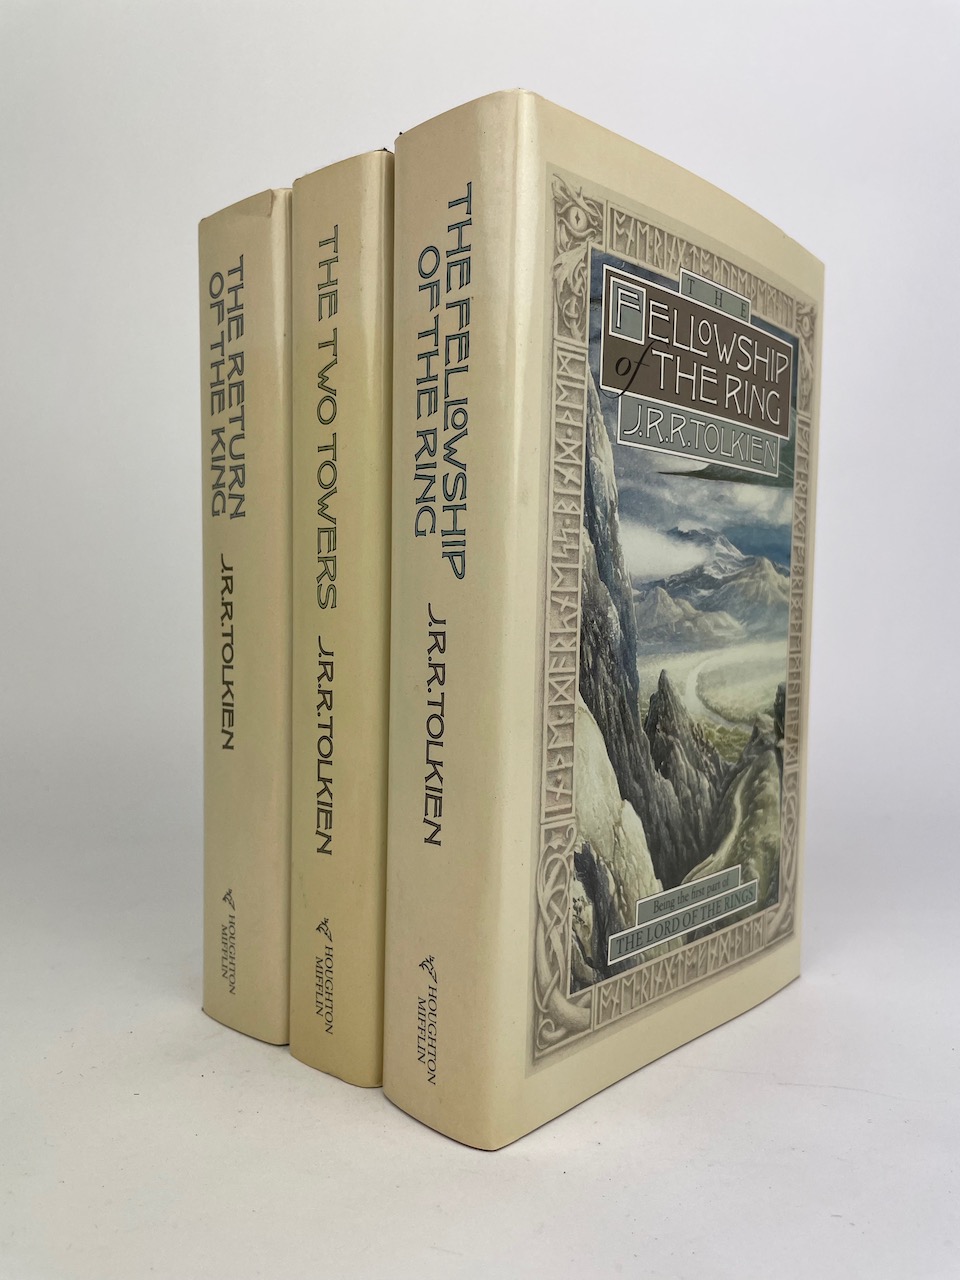 The Lord of the Rings JRR Tolkien Alan Lee set from 1988, by Houghton Mifflin 9